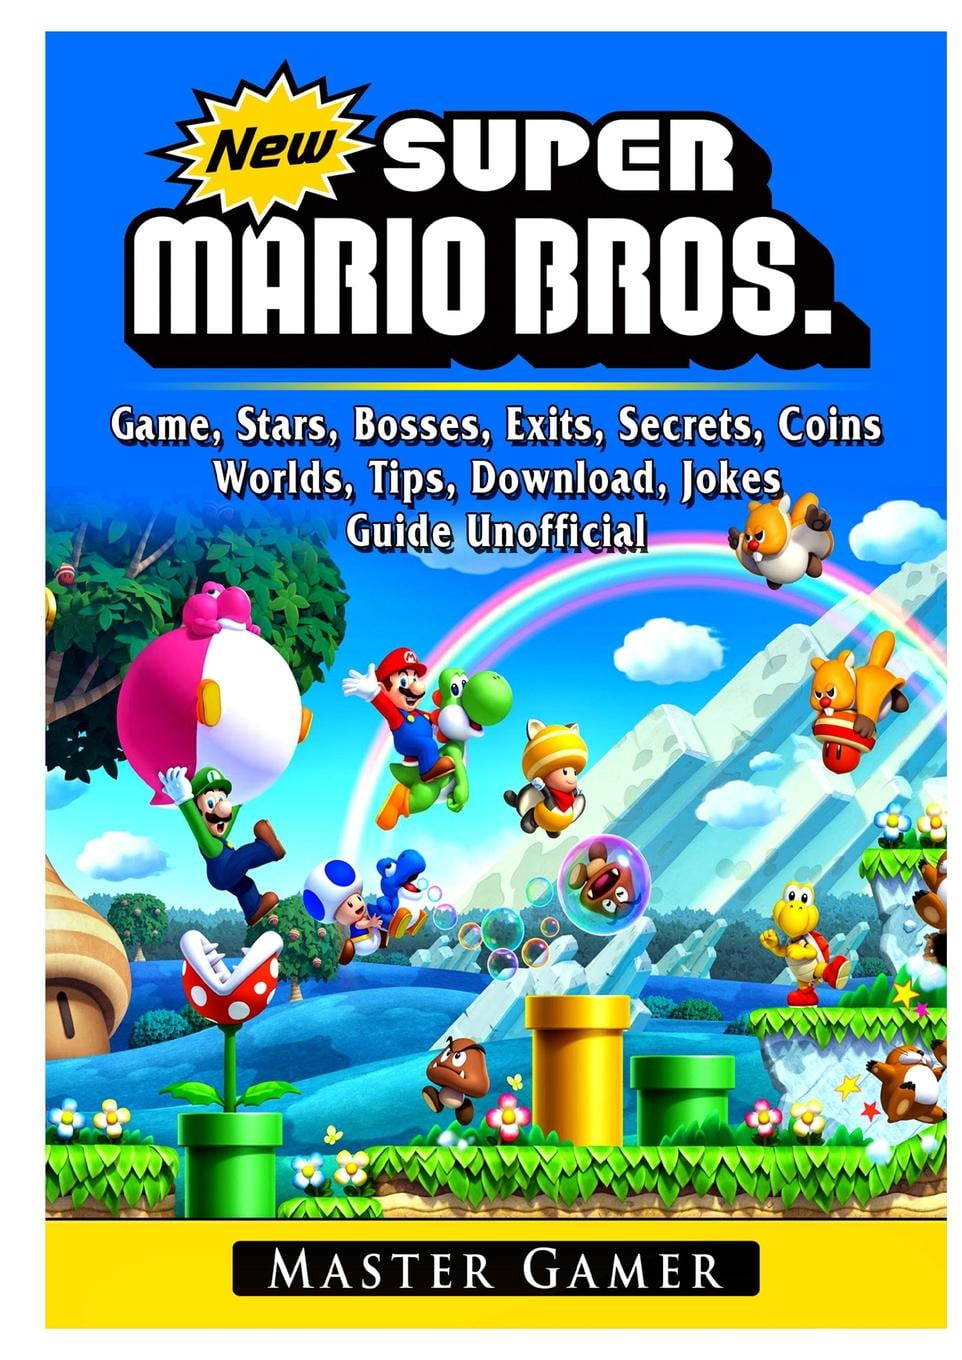 How to download Super Mario Bros - New Trick, Tips and Guide for